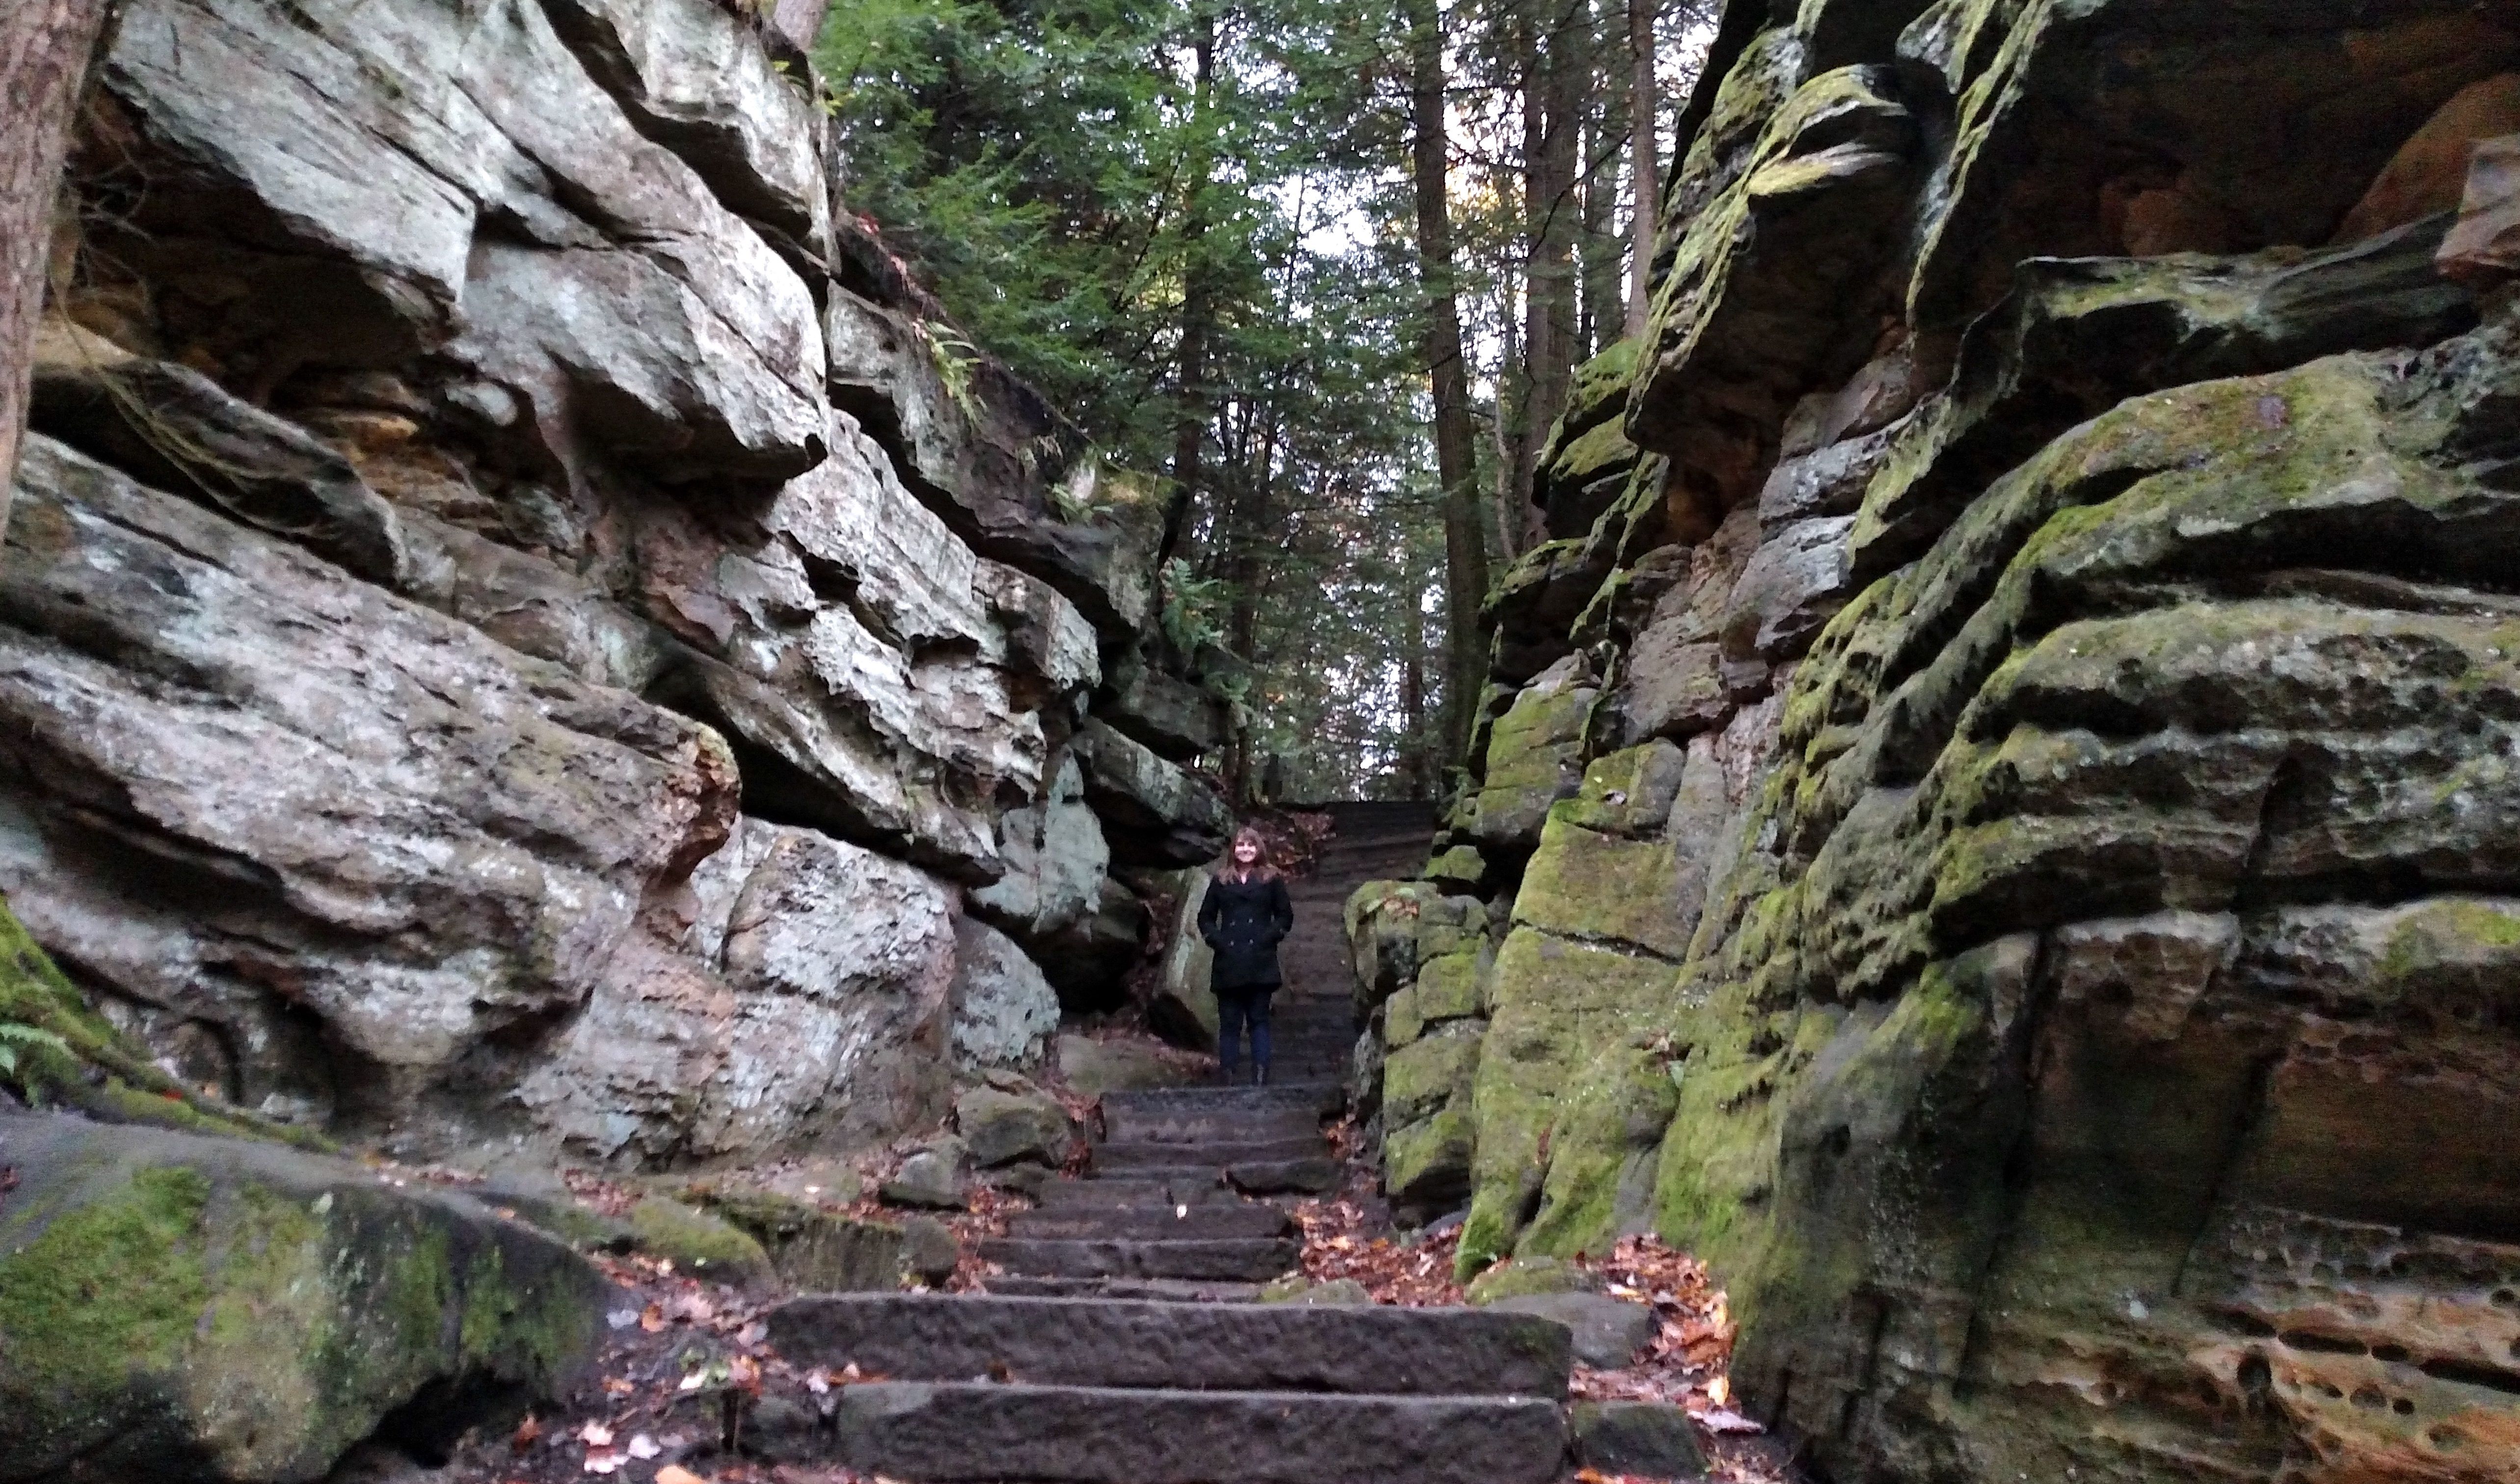 Alissa stands on the Ledges Trail's stone staircase with cliffs on either side